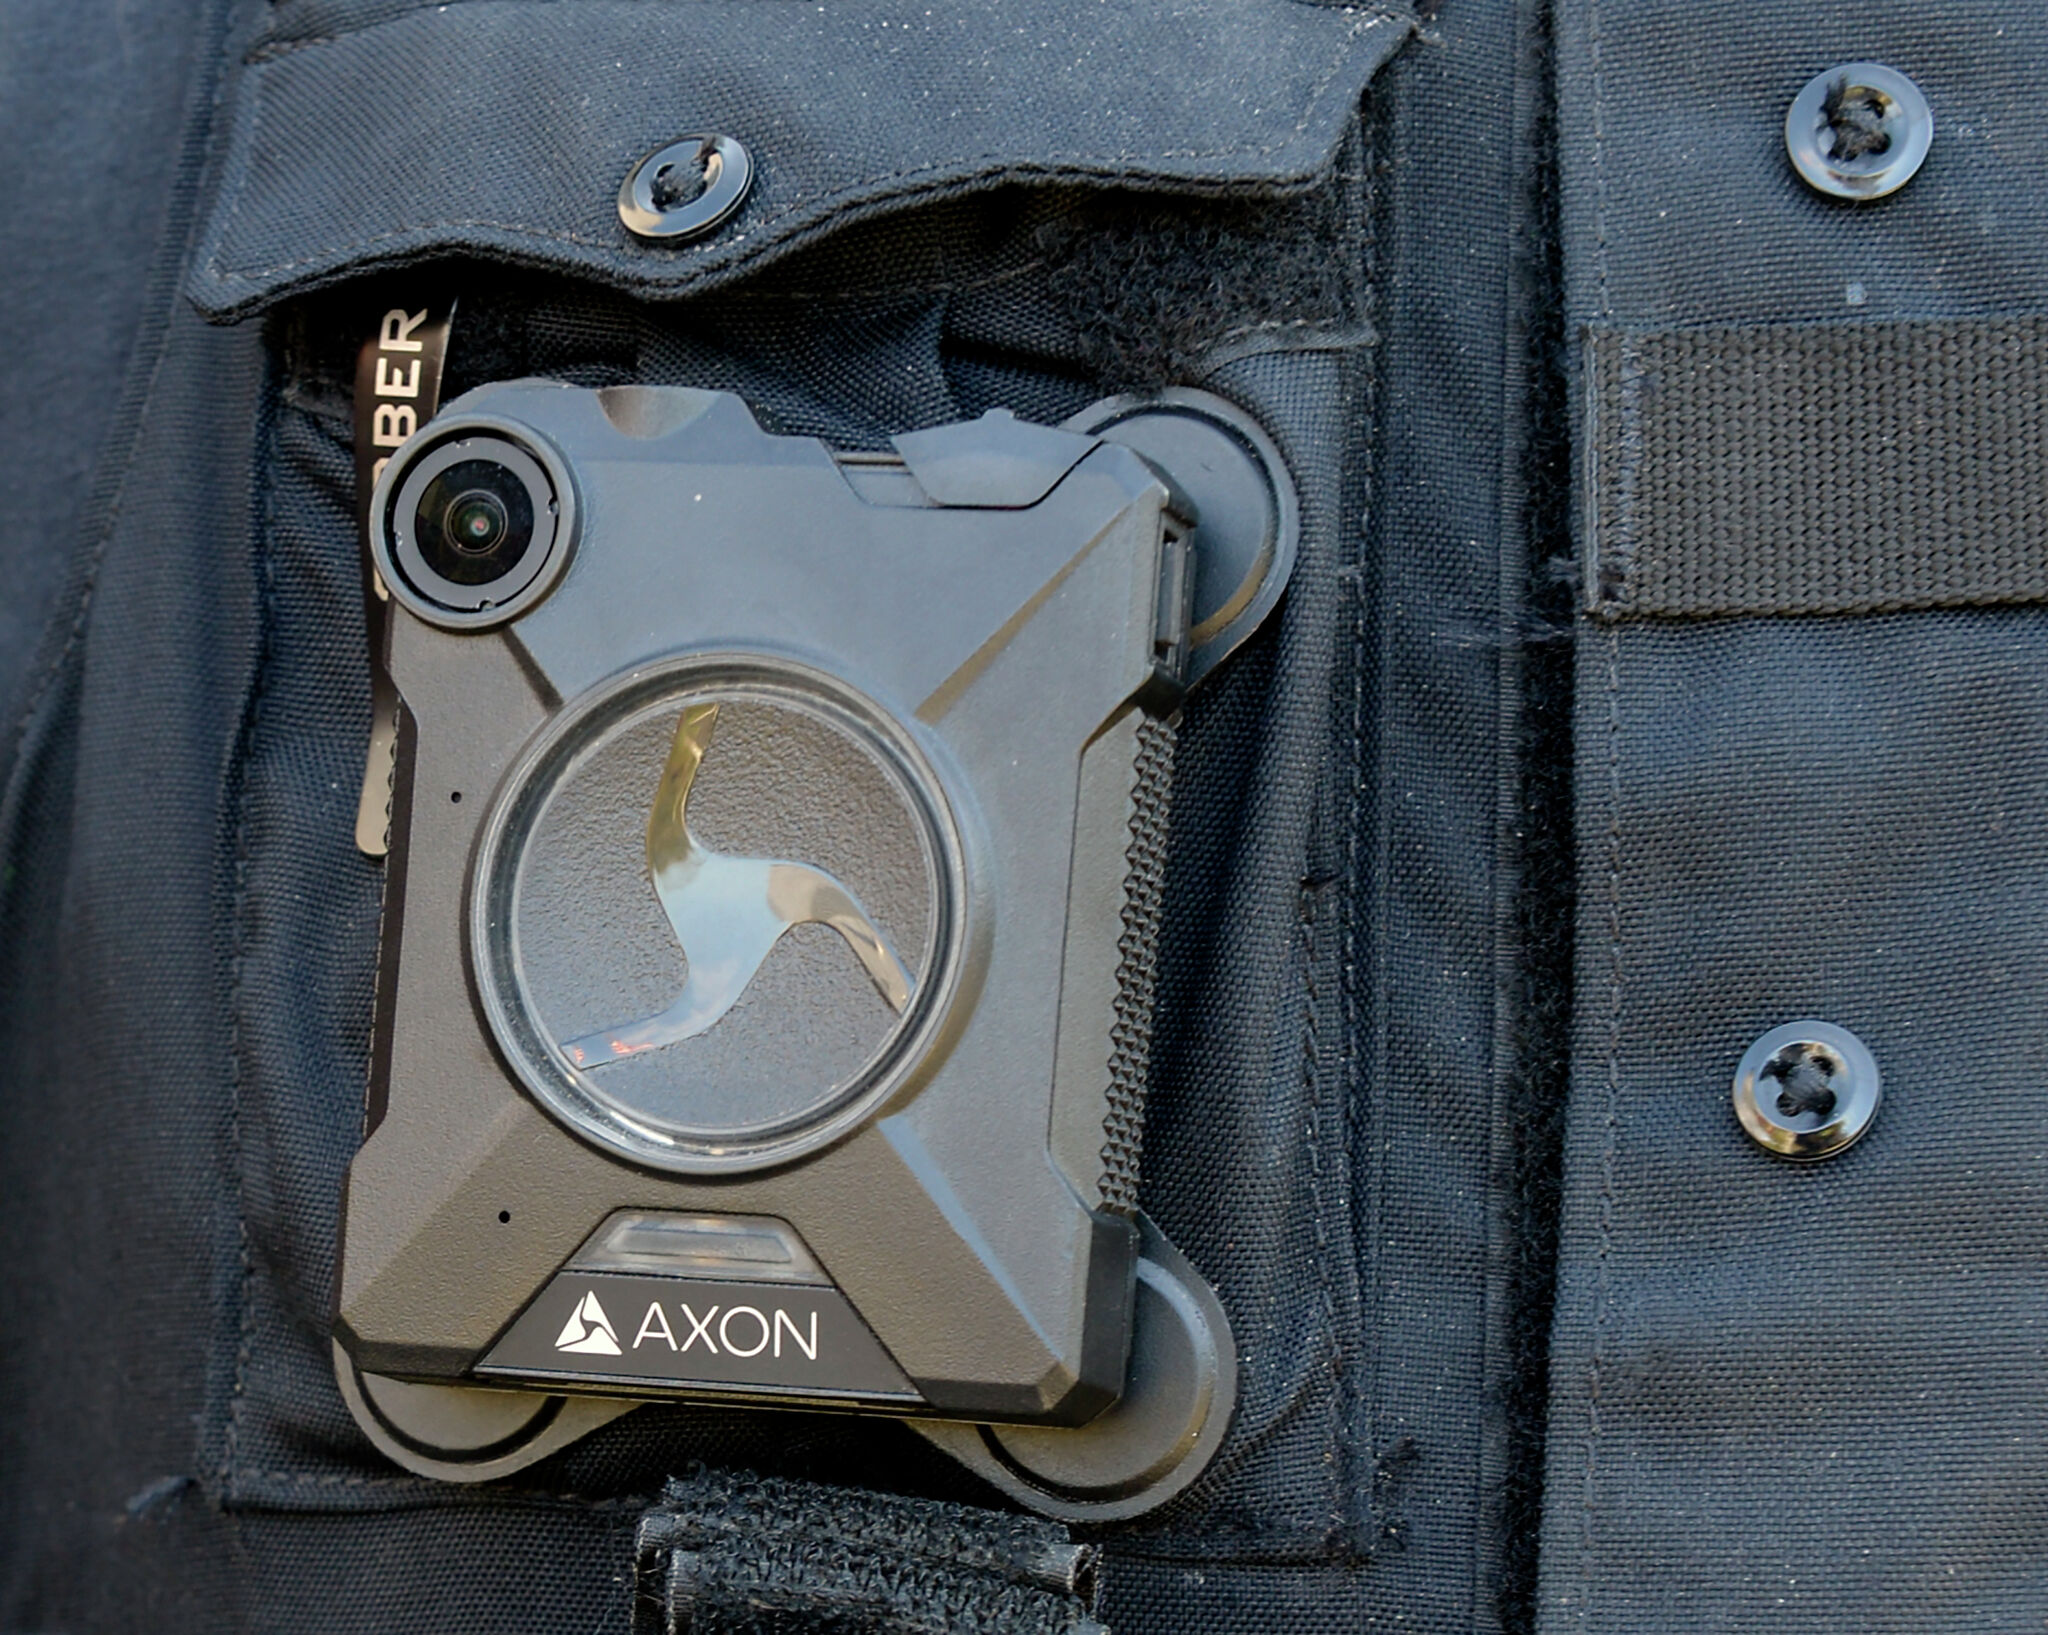 Are body cameras everything they're cracked up to be? - The Gateway